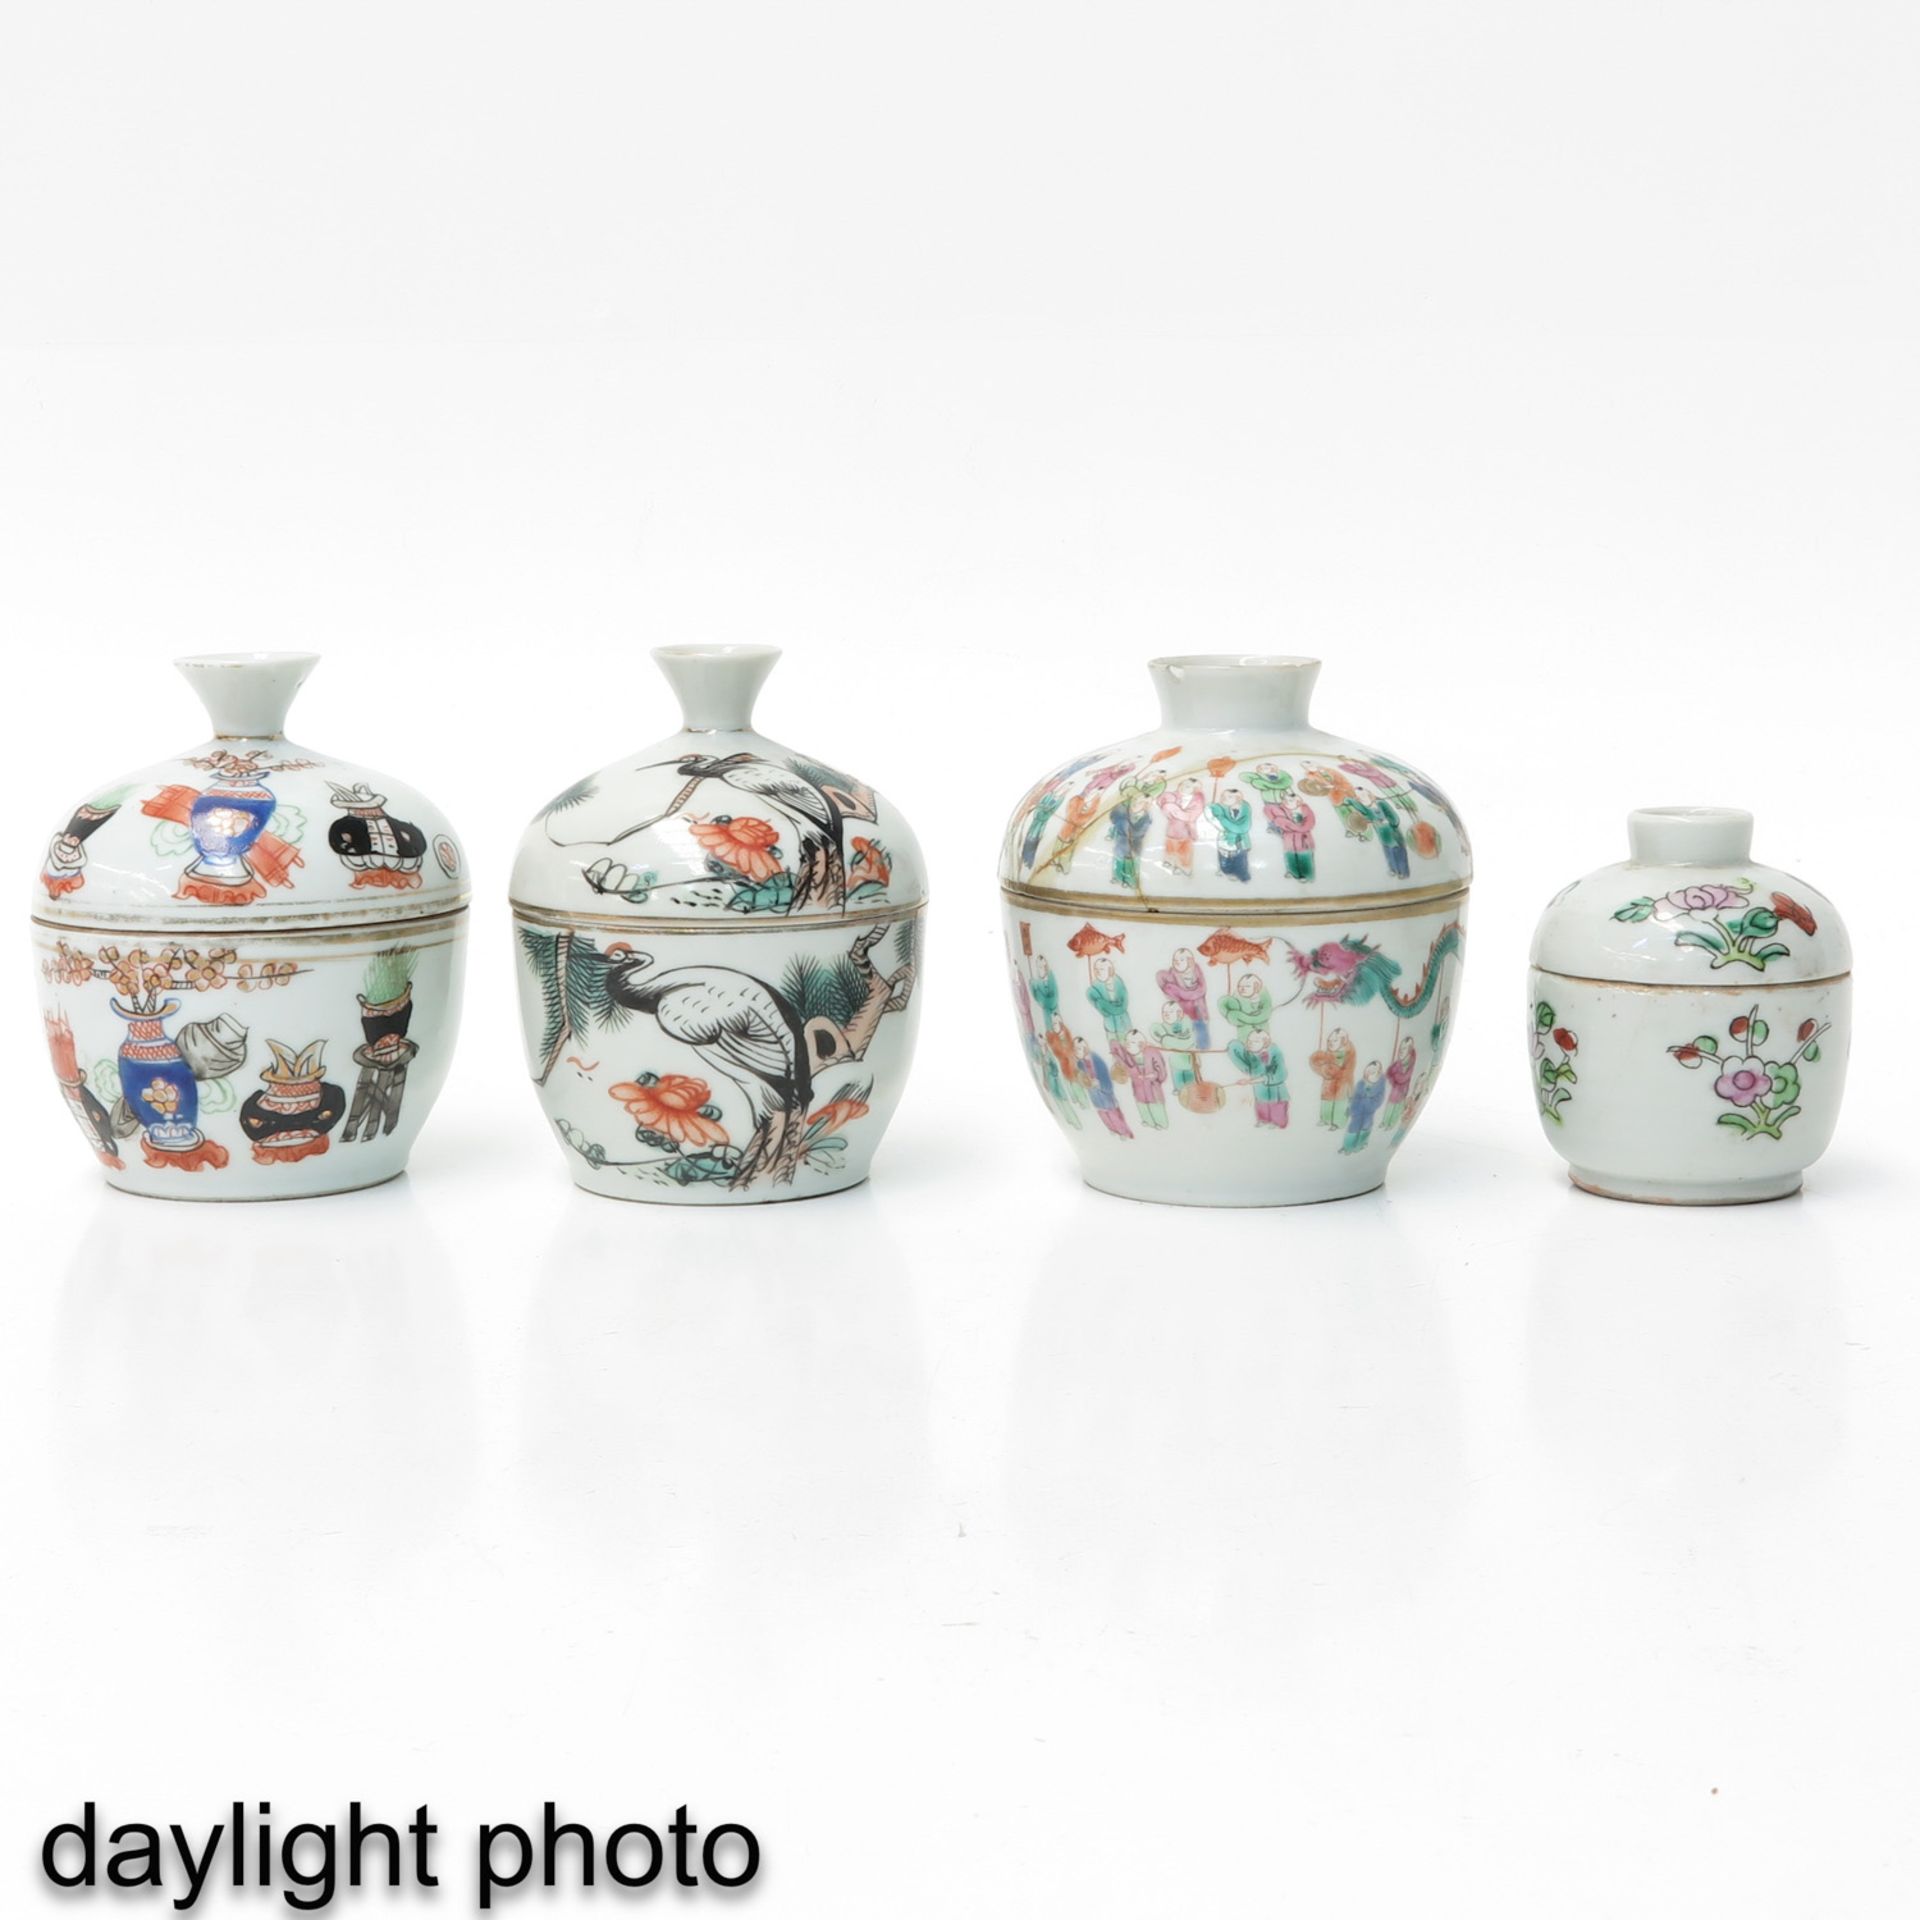 A Collection of 5 Jars with Covers - Image 7 of 10